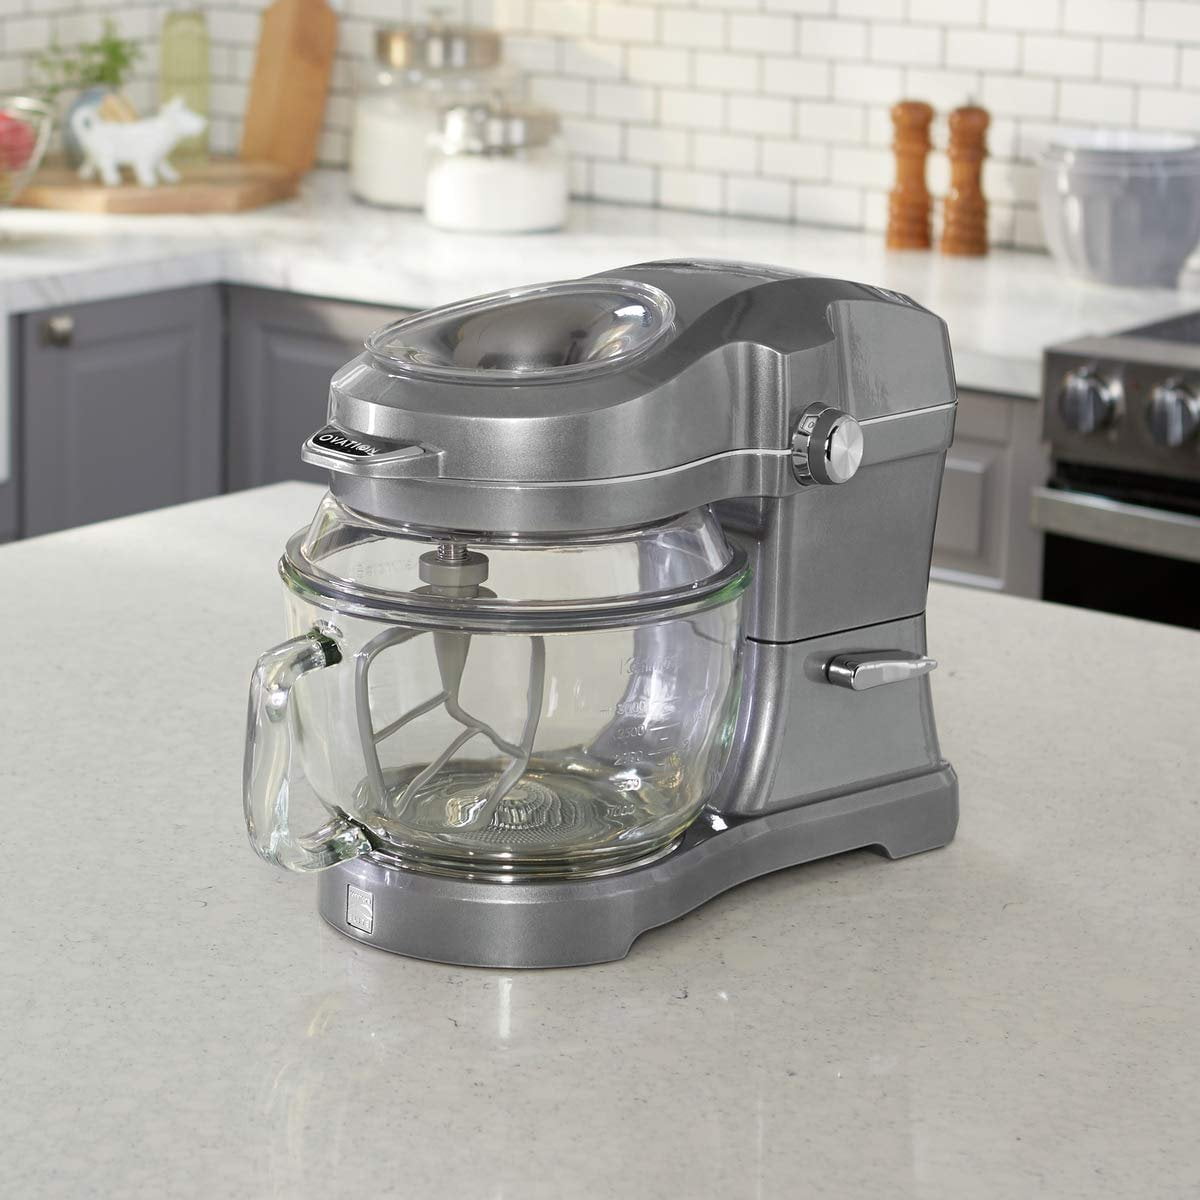 Kenmore Elite Ovation 5 qt Stand Mixer with Pour-In Top 500W Gray